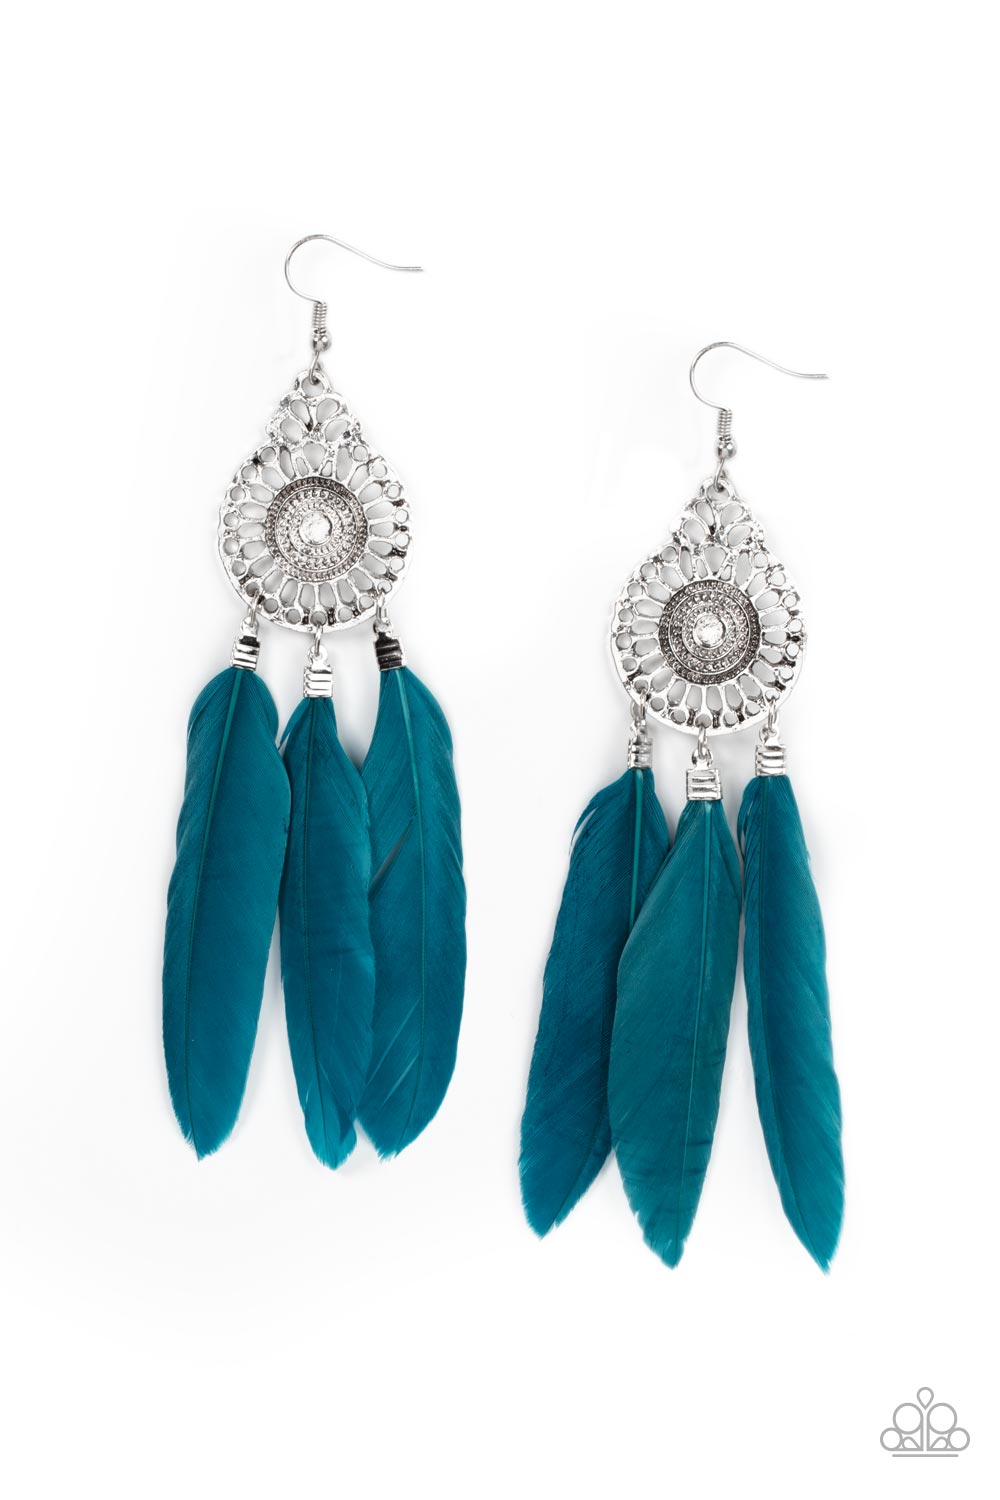 Pretty in PLUMES - Blue Feather Earrings - Paparazzi Accessories